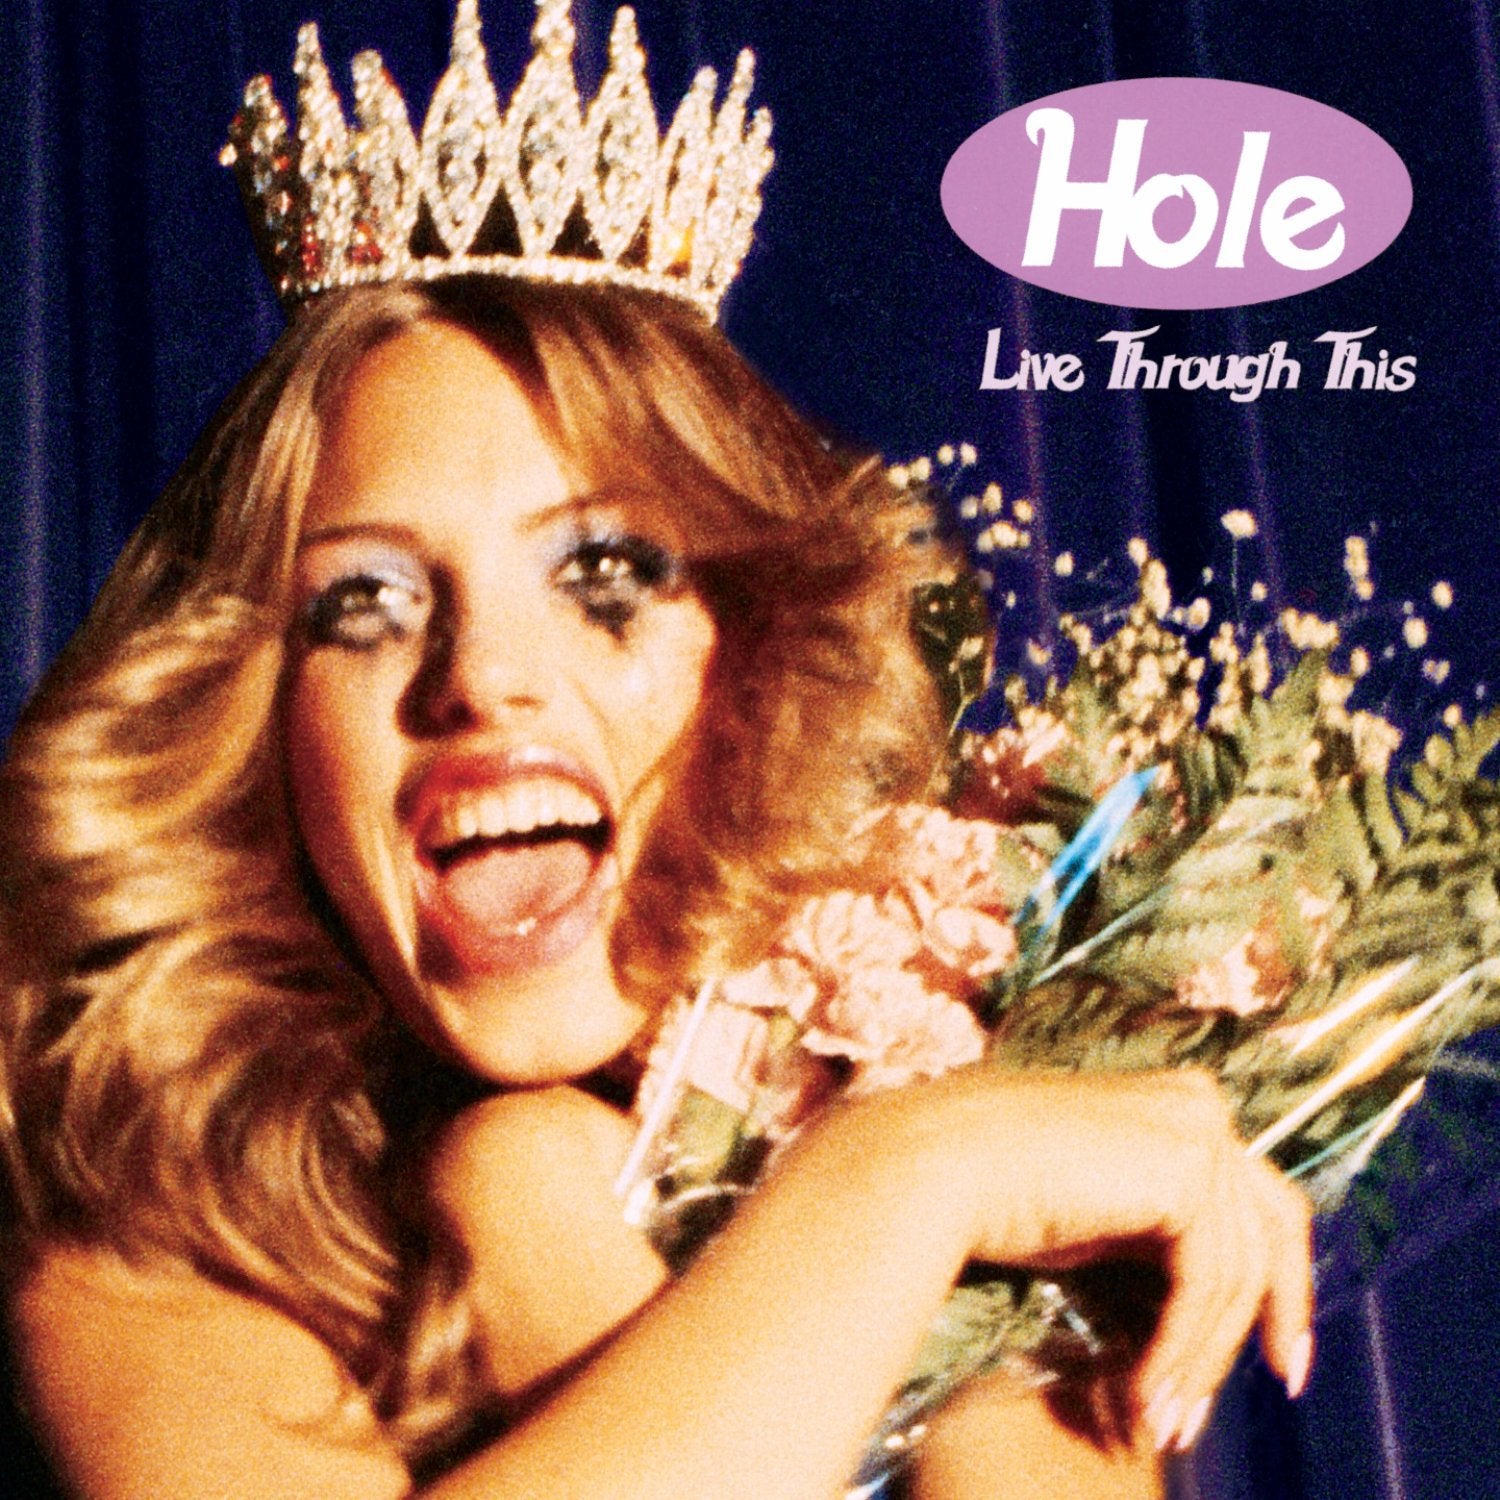 Hole- Live Through This - Darkside Records